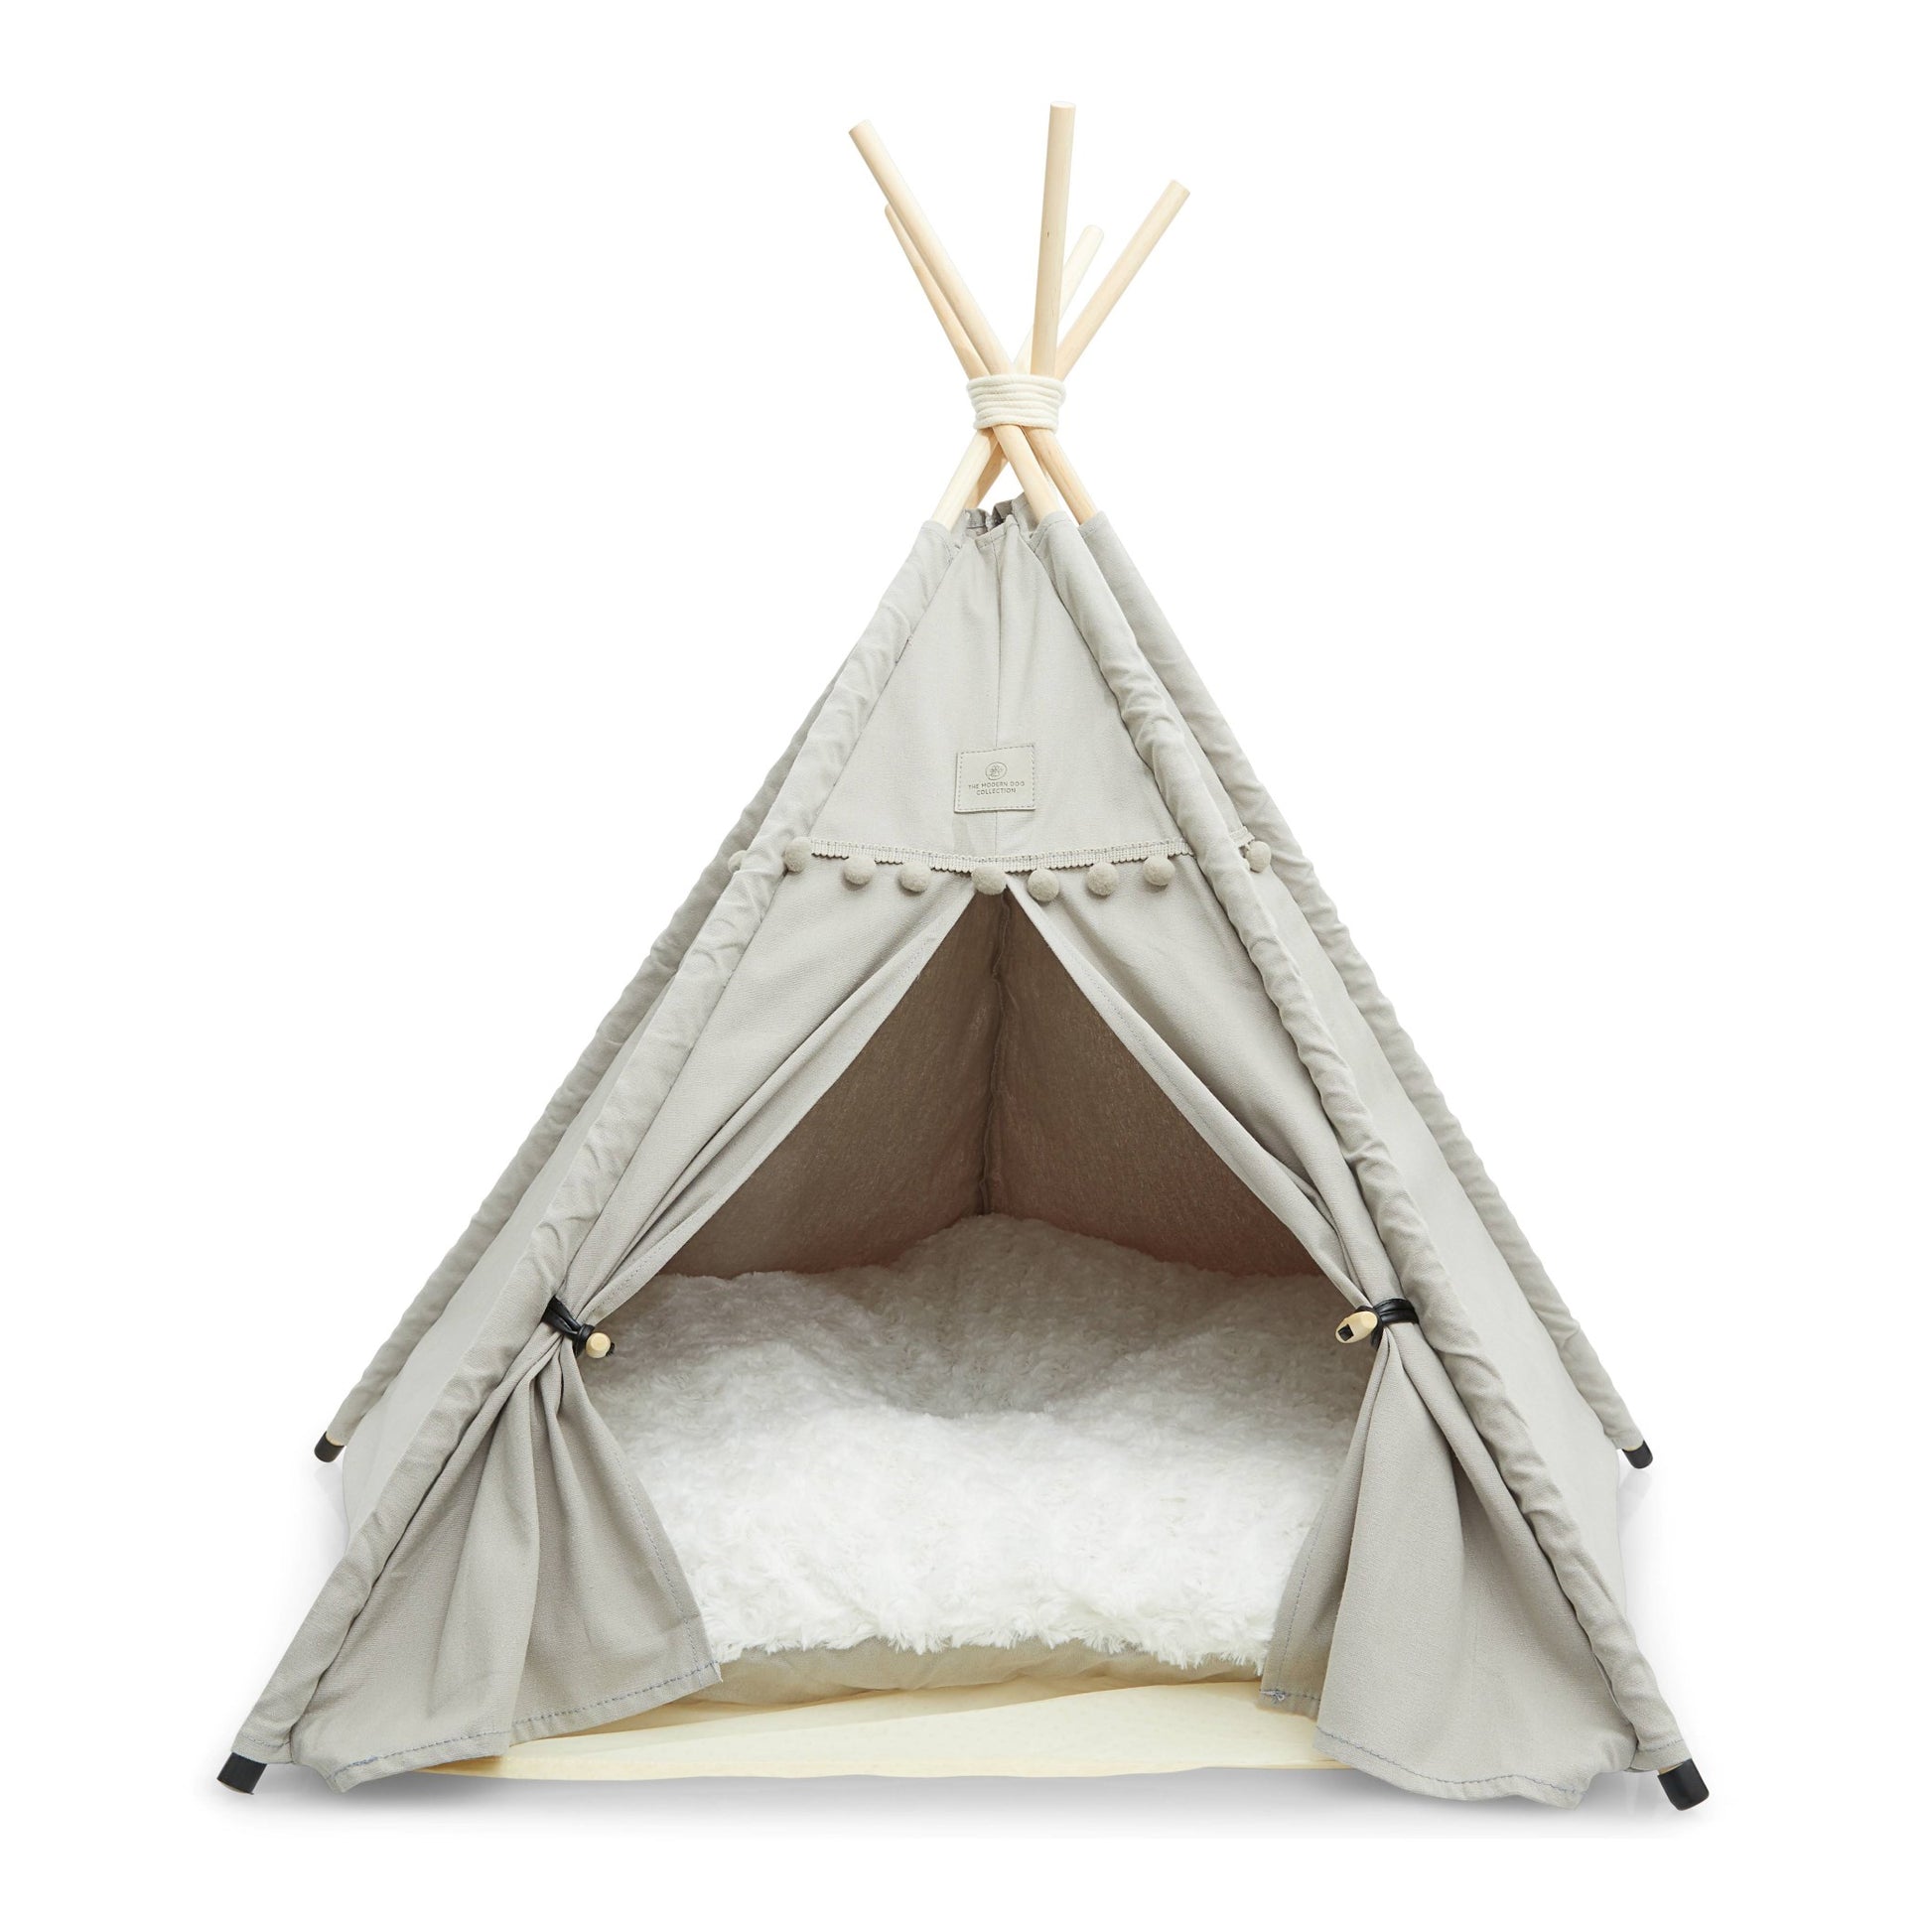 Denali teepee dog bed grey with thick, soft cushion, floor protectors, wooden poles, and tieback curtains.